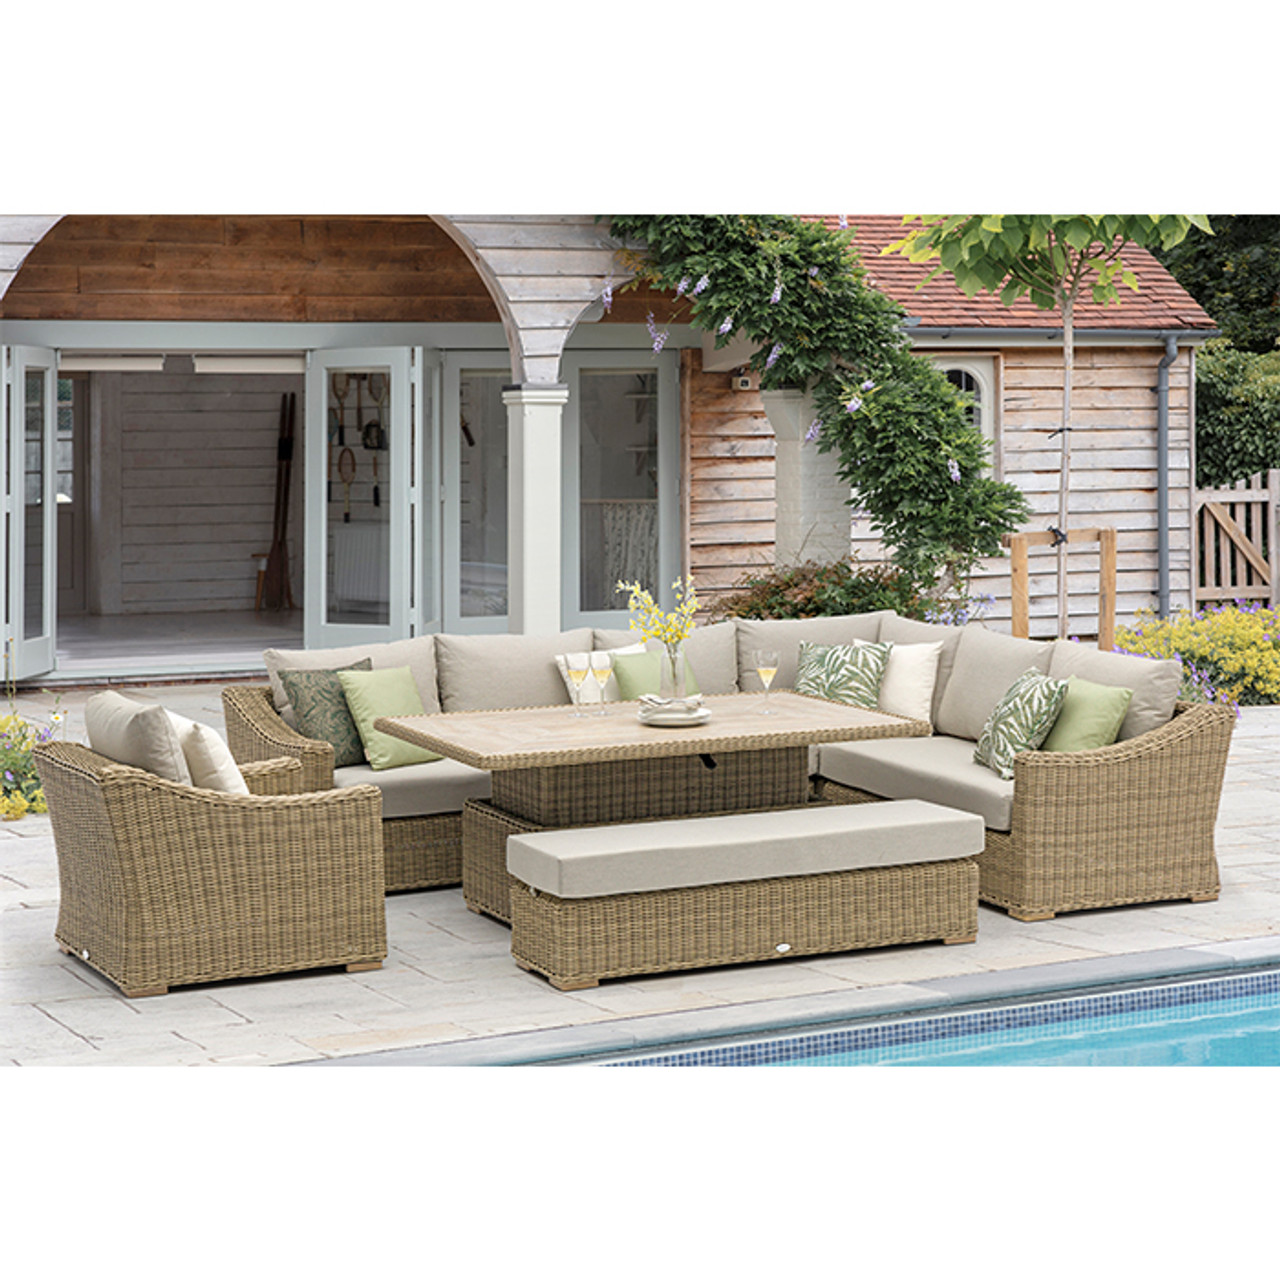 Fairford Modular Sofa Set *Sold out order now for July Delivery